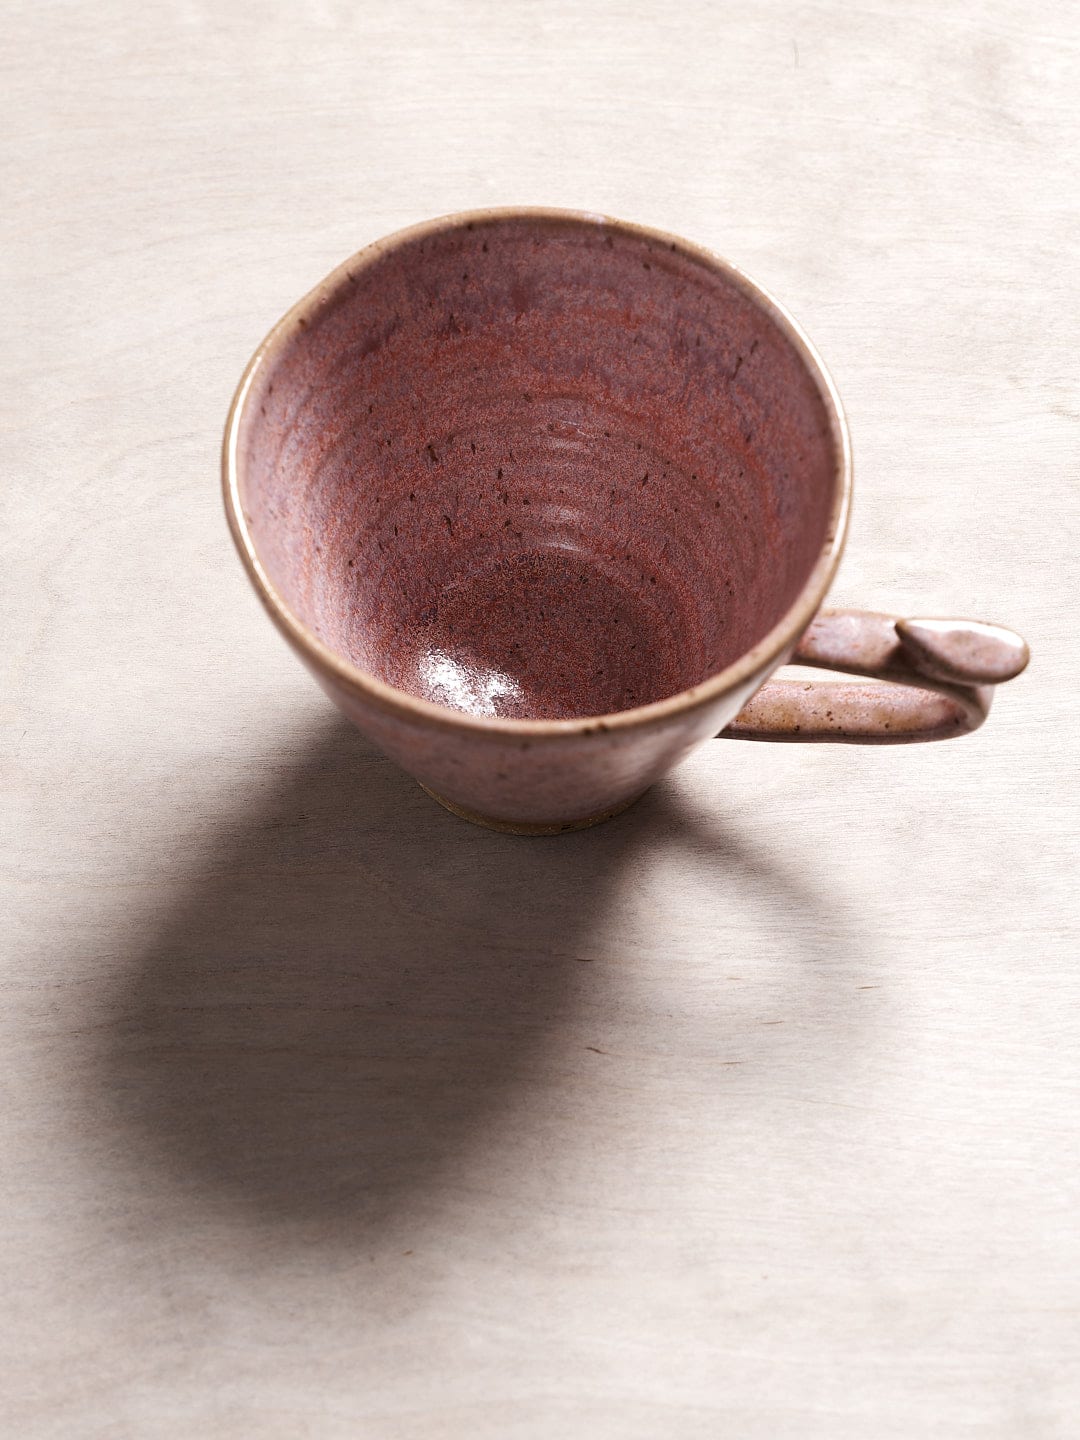 A Bird Handle Mug – Rhubarb sitting on top of a wooden table from Jino Ceramic Studio.